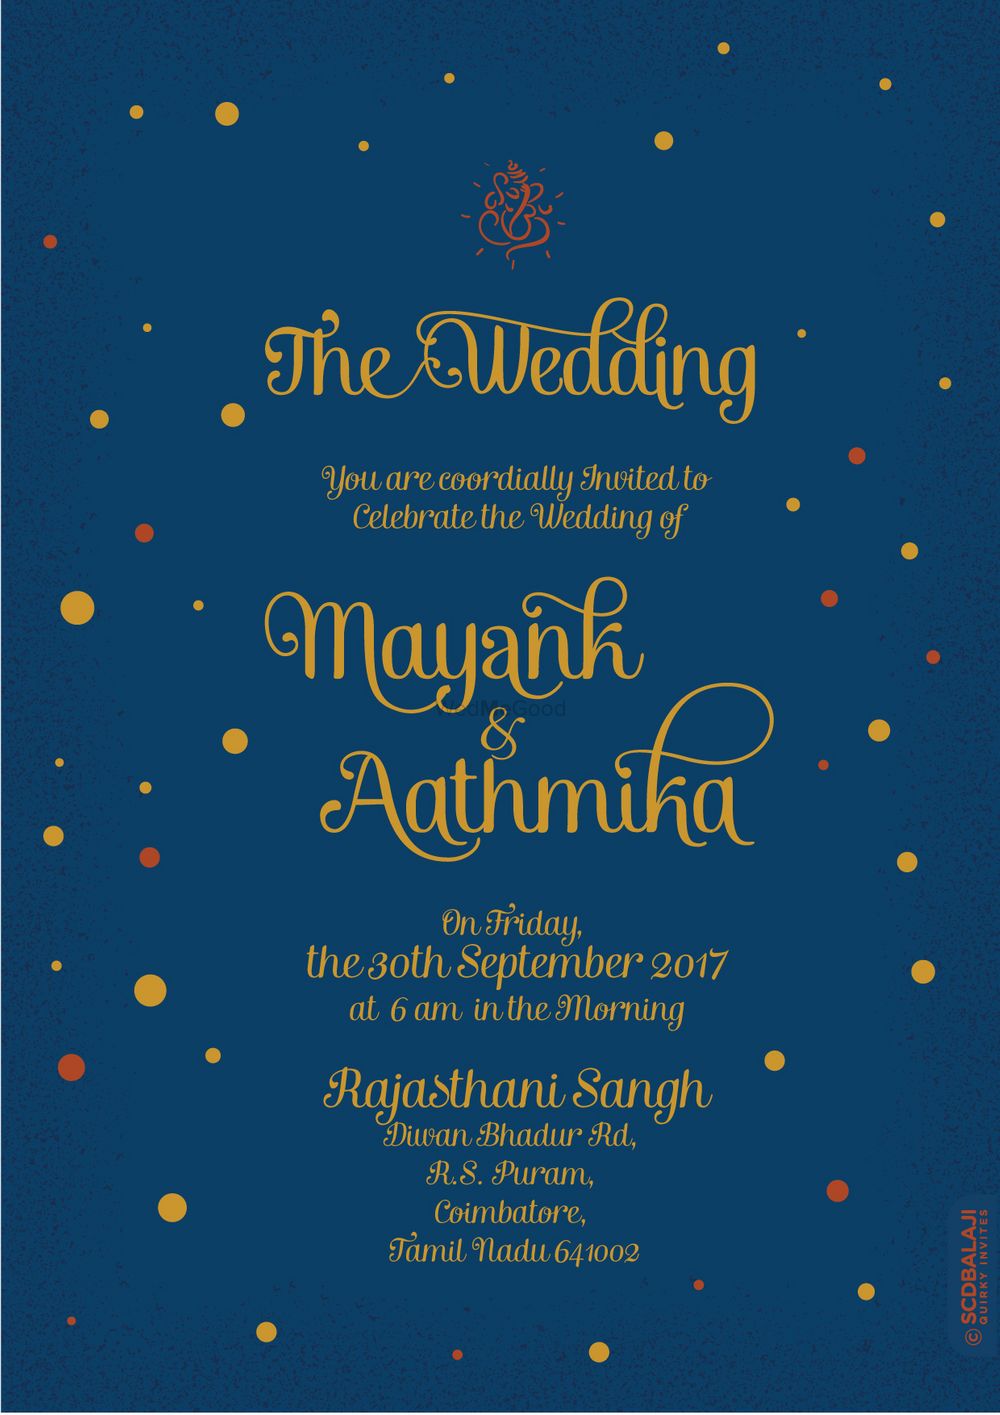 Photo From North Indian Wedding Invite - By Atma Studios